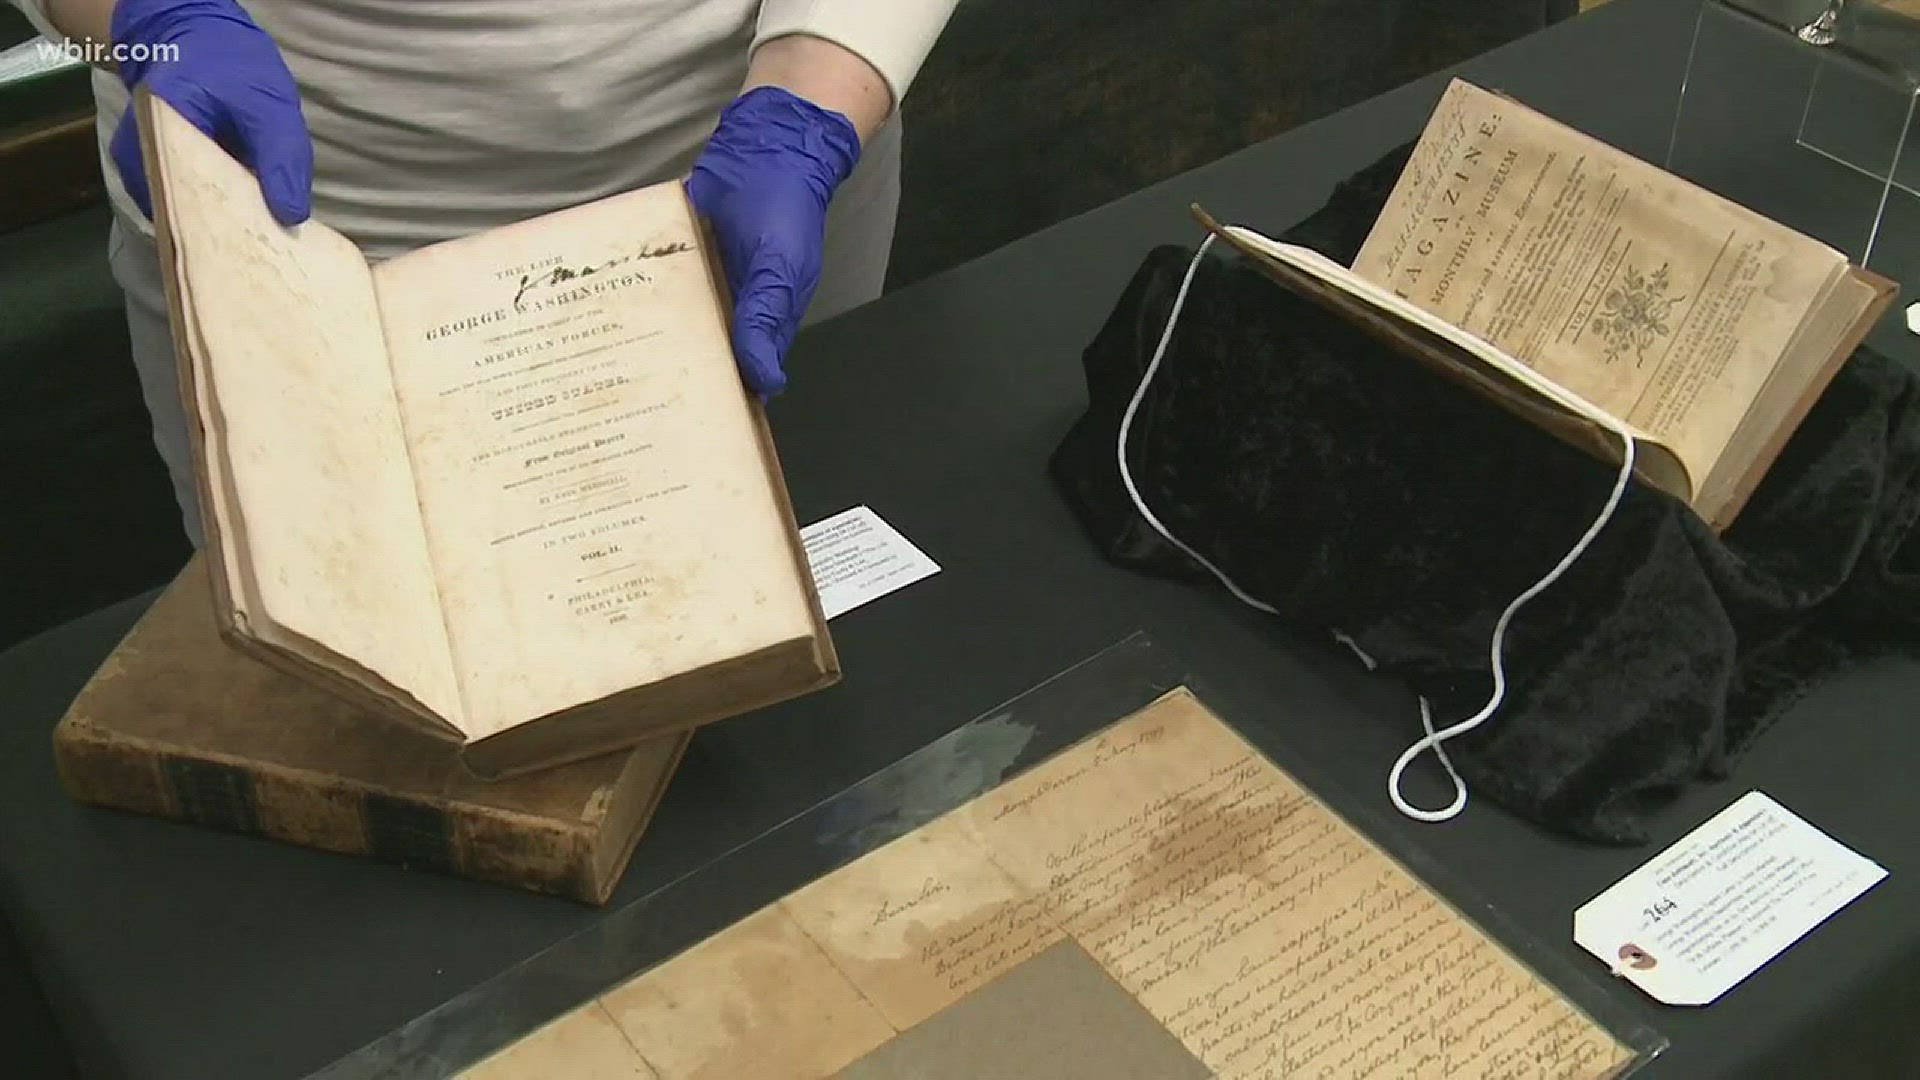 Jan. 23, 2018: A rare book from the personal library of George Washington will be up for auction at a Knoxville auction house.